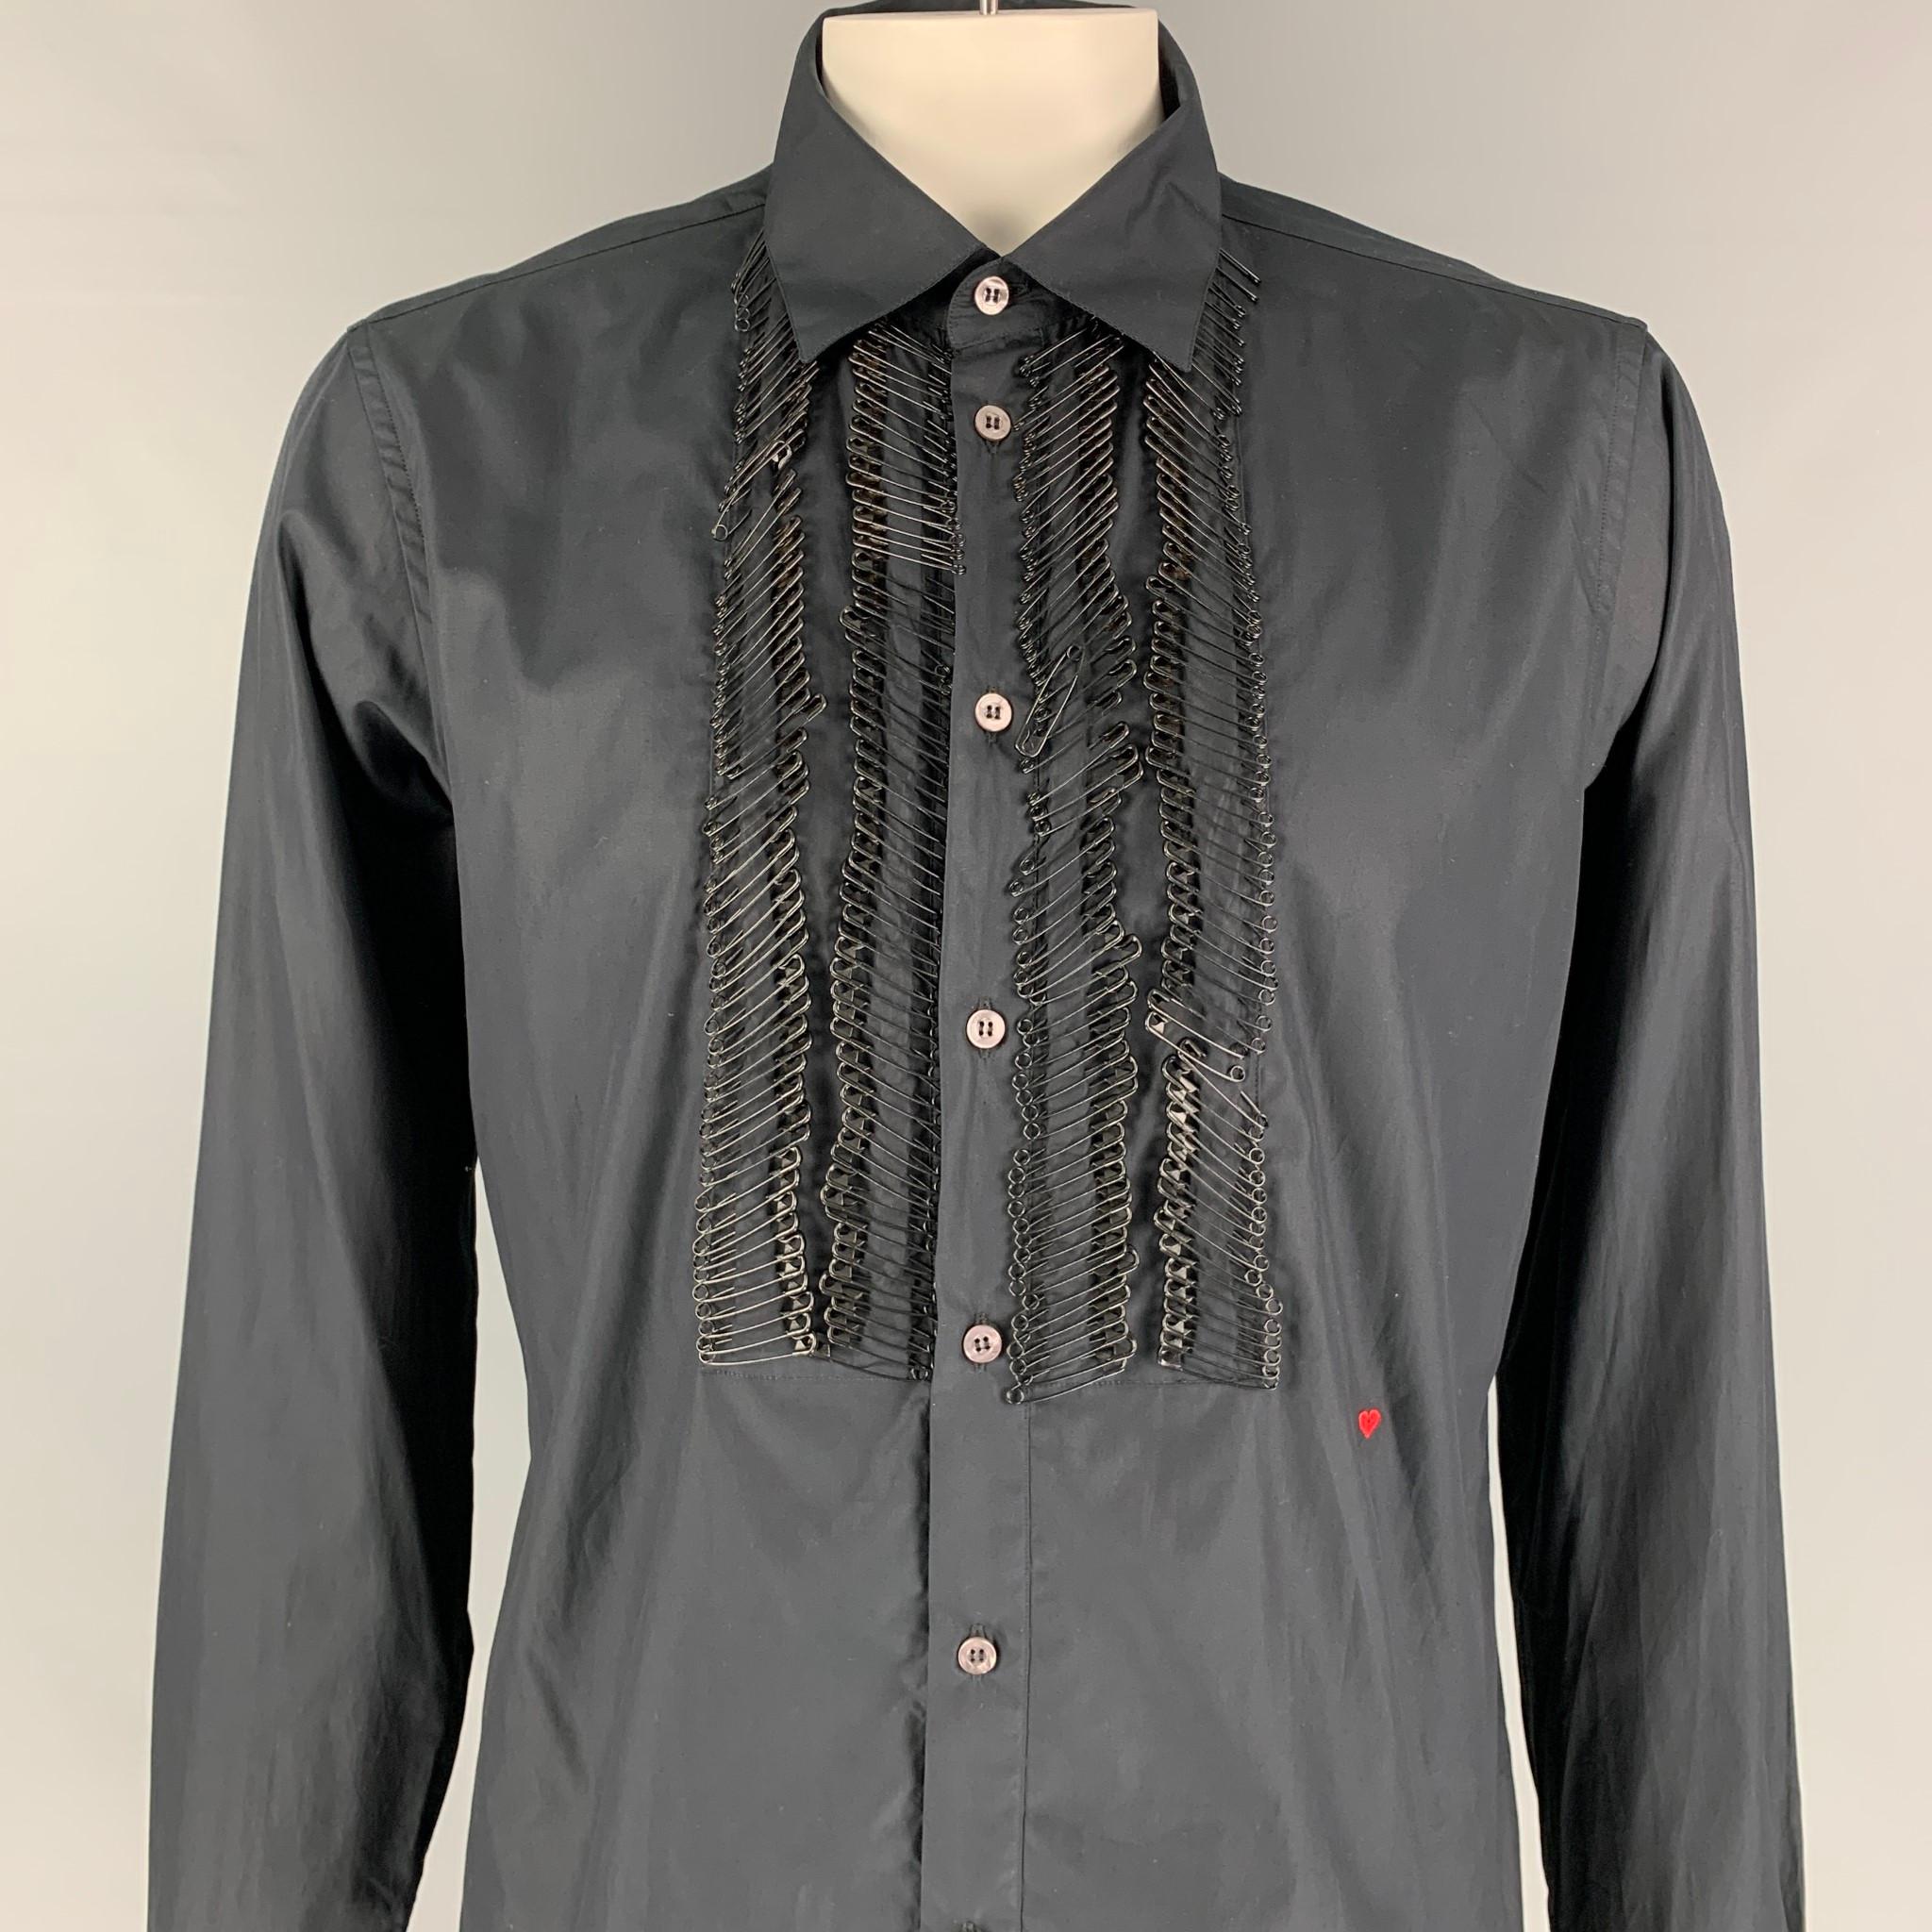 MOSCHINO long sleeve shirt comes in a black cotton featuring a slim fit, safety pin details, embroidered heart detail, spread collar, and a buttoned closure. Made in Italy. 

Excellent Pre-Owned Condition.
Marked: XXL

Measurements:

Shoulder: 19